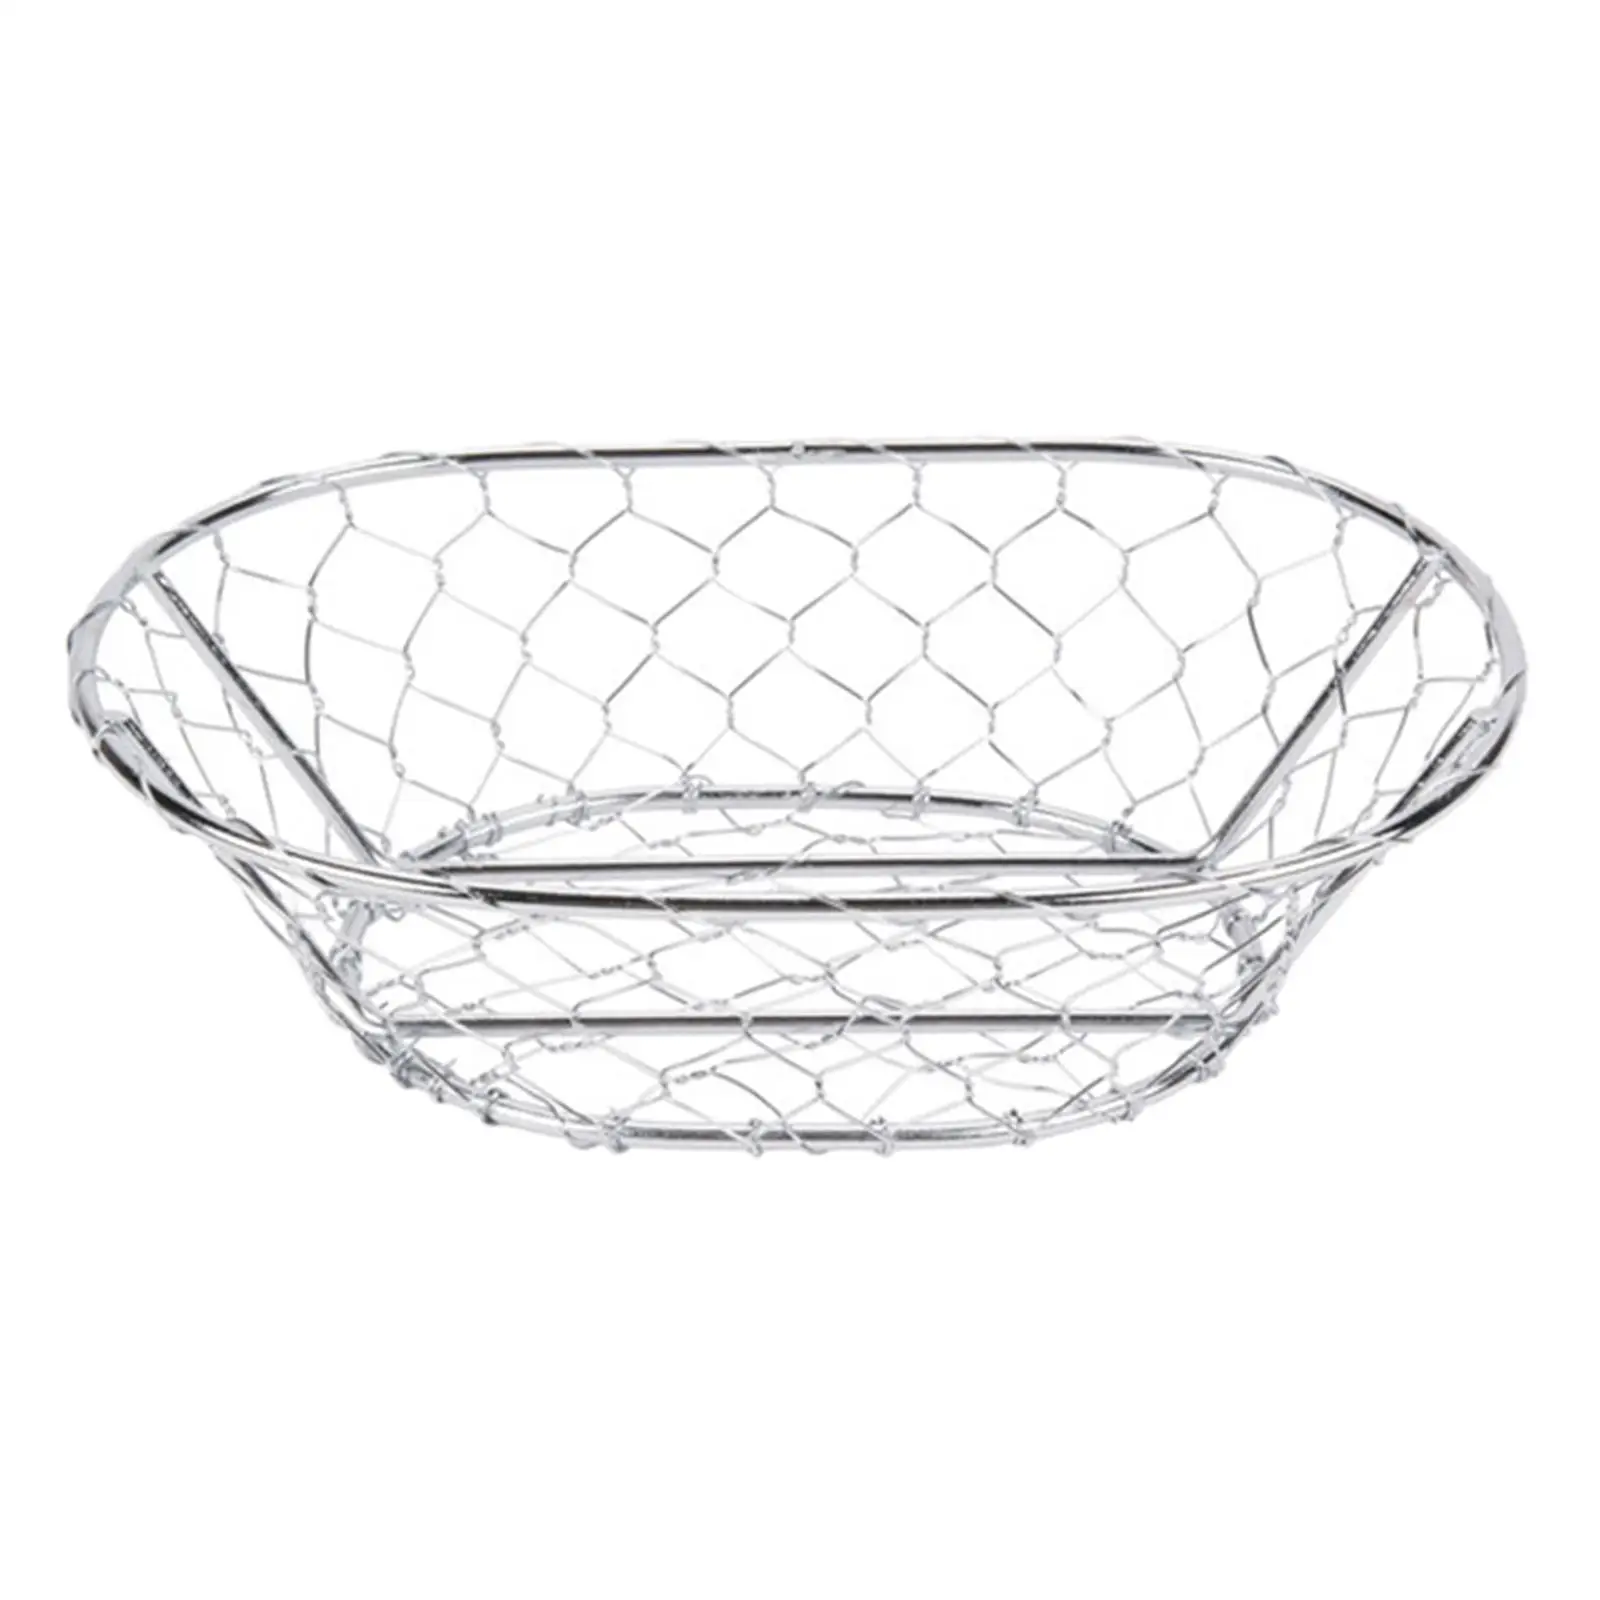 Iron Wire Basket Wire Iron Fruit Bowl Storage Stand Vegetable Bowl Holder Rack Vegetable Plate Holder Container Egg Basket